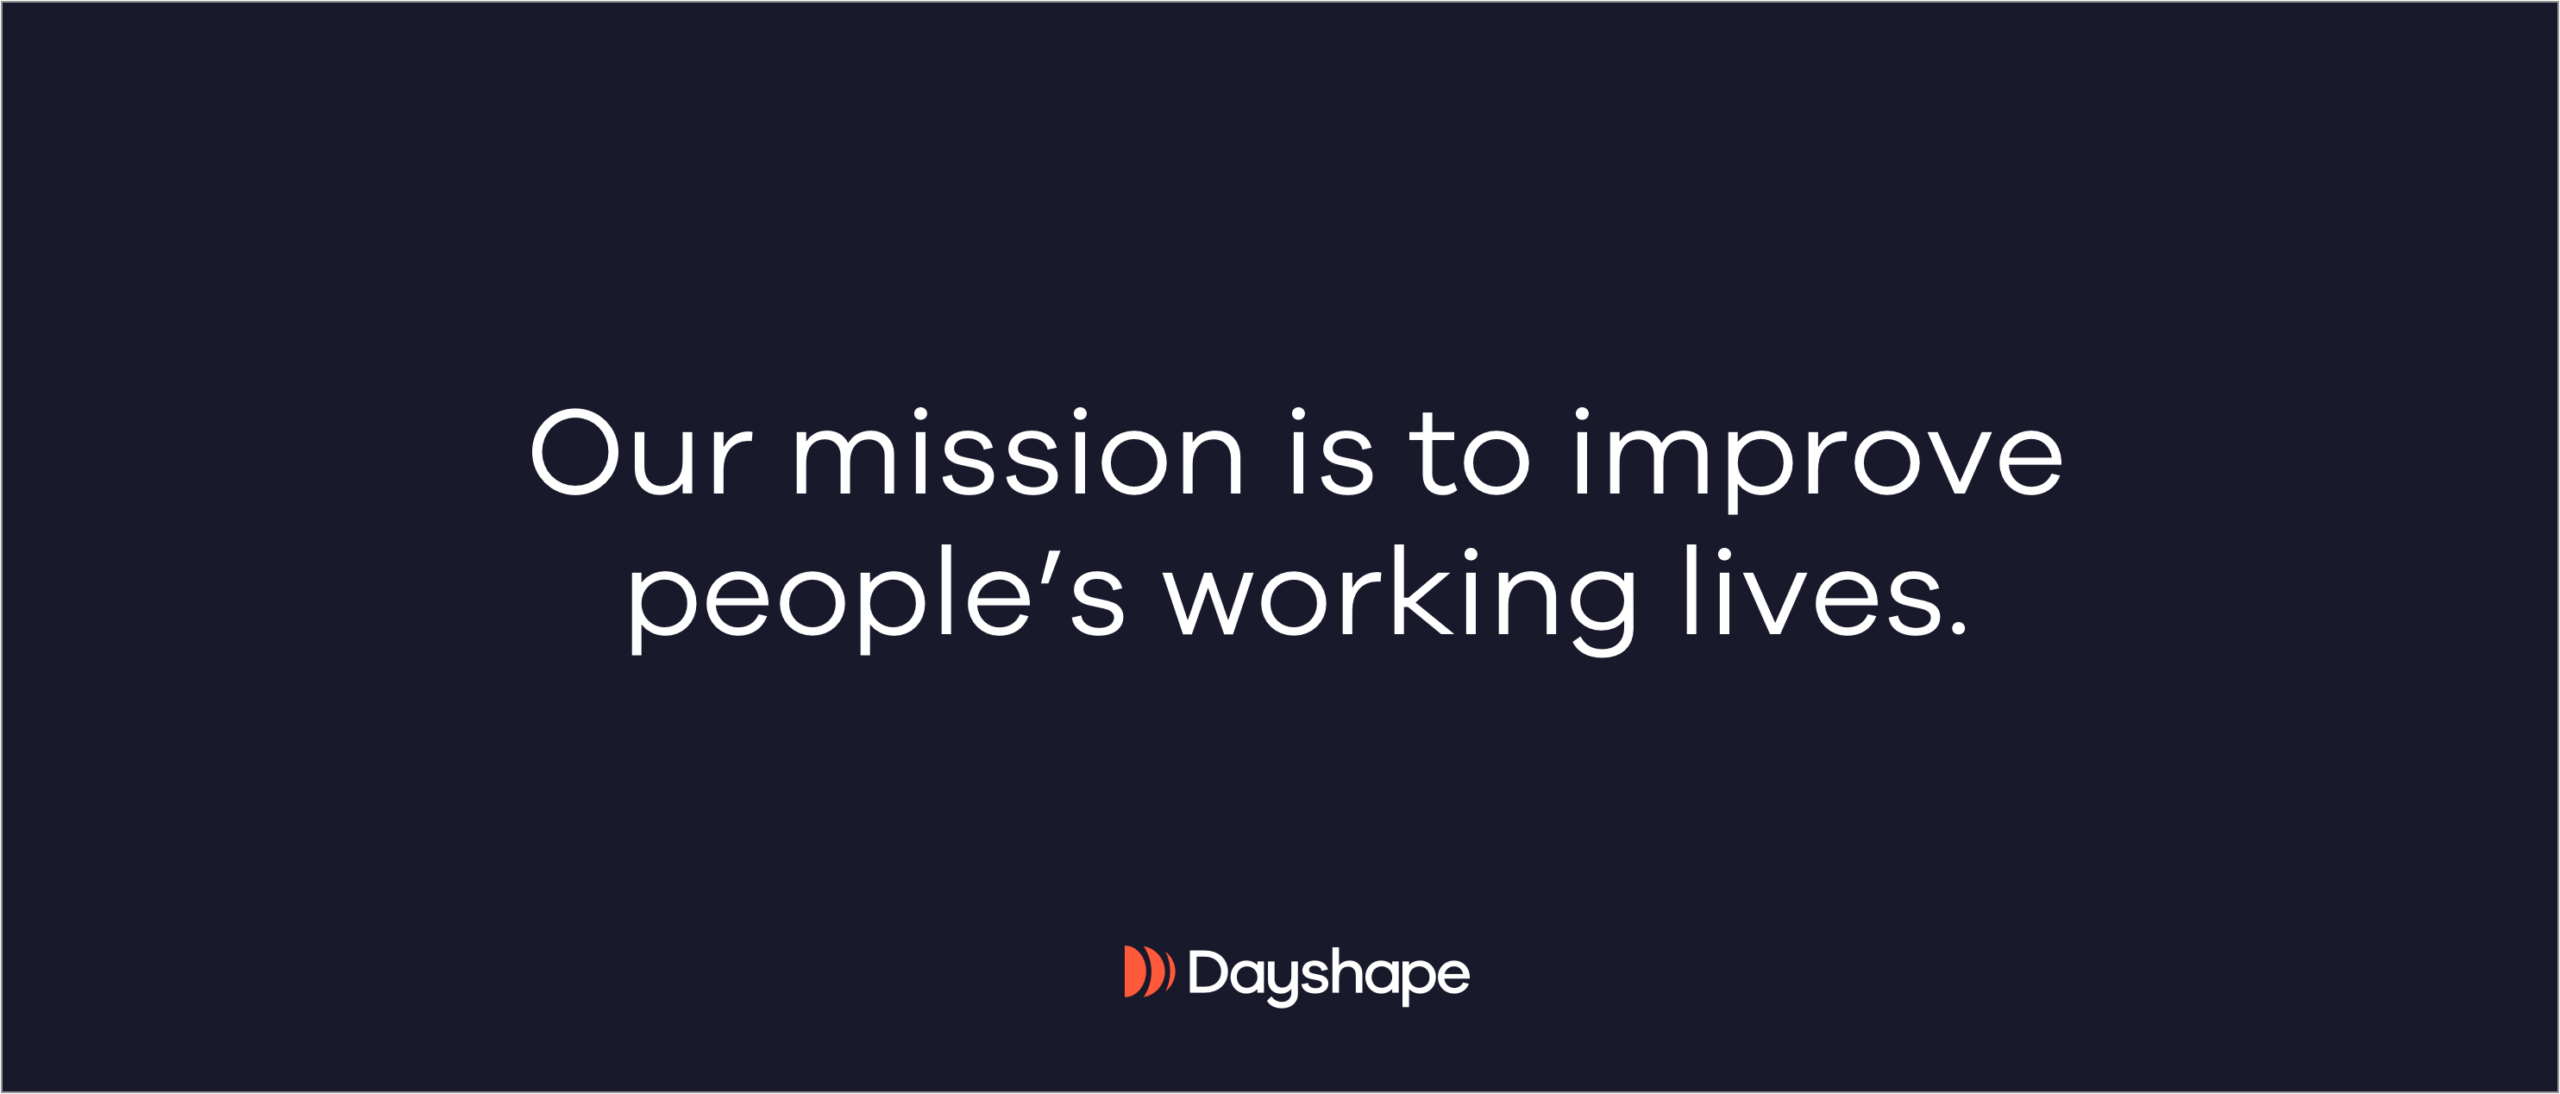 “Our mission is to improve people's working lives. Dayshape” sits on a black background